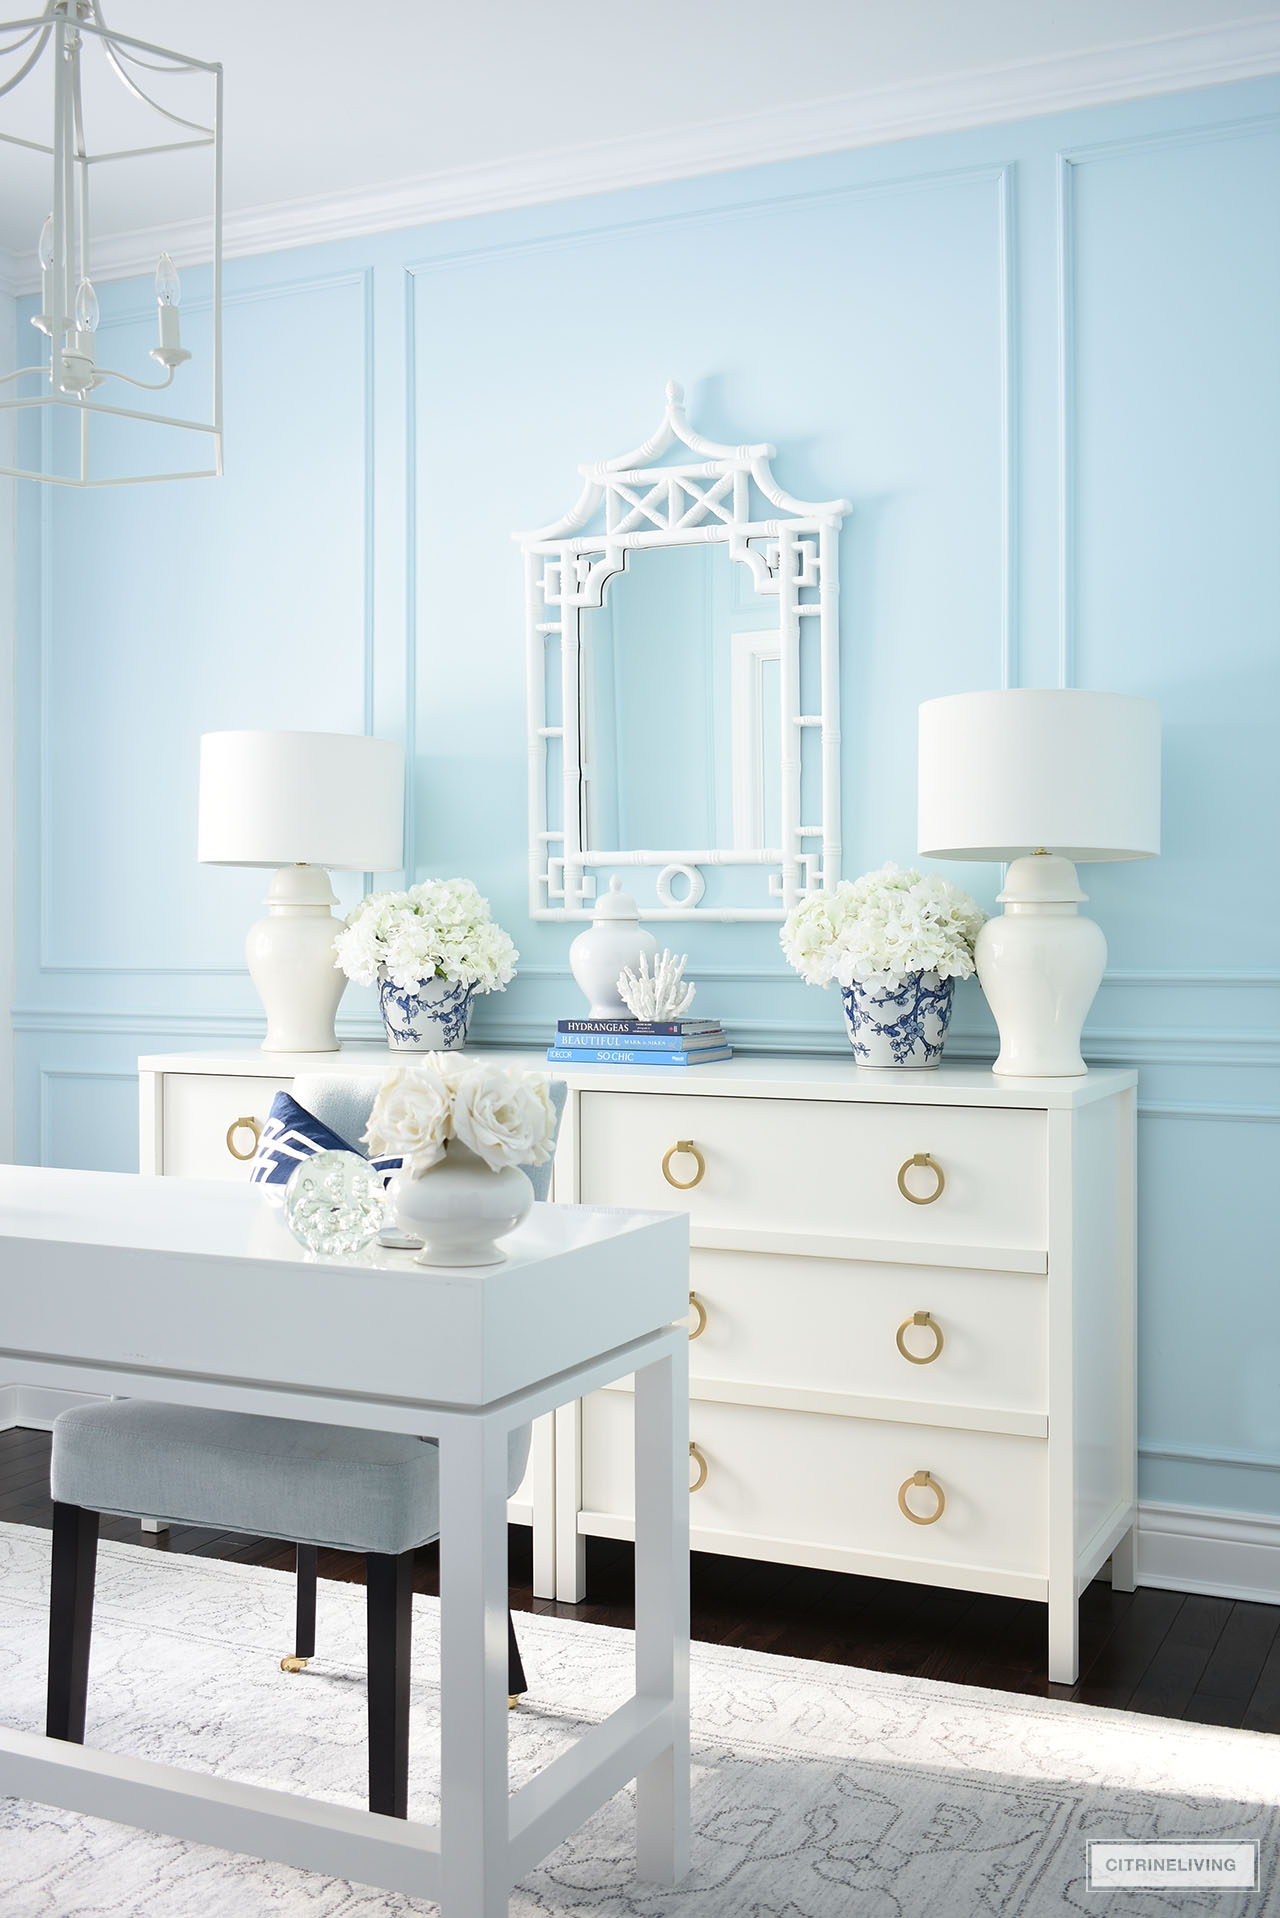 DRESSER, DECOR AND MIRROR IN ELEGANT HOME OFFICE IN BLUE + WHITE CHINOISERIE